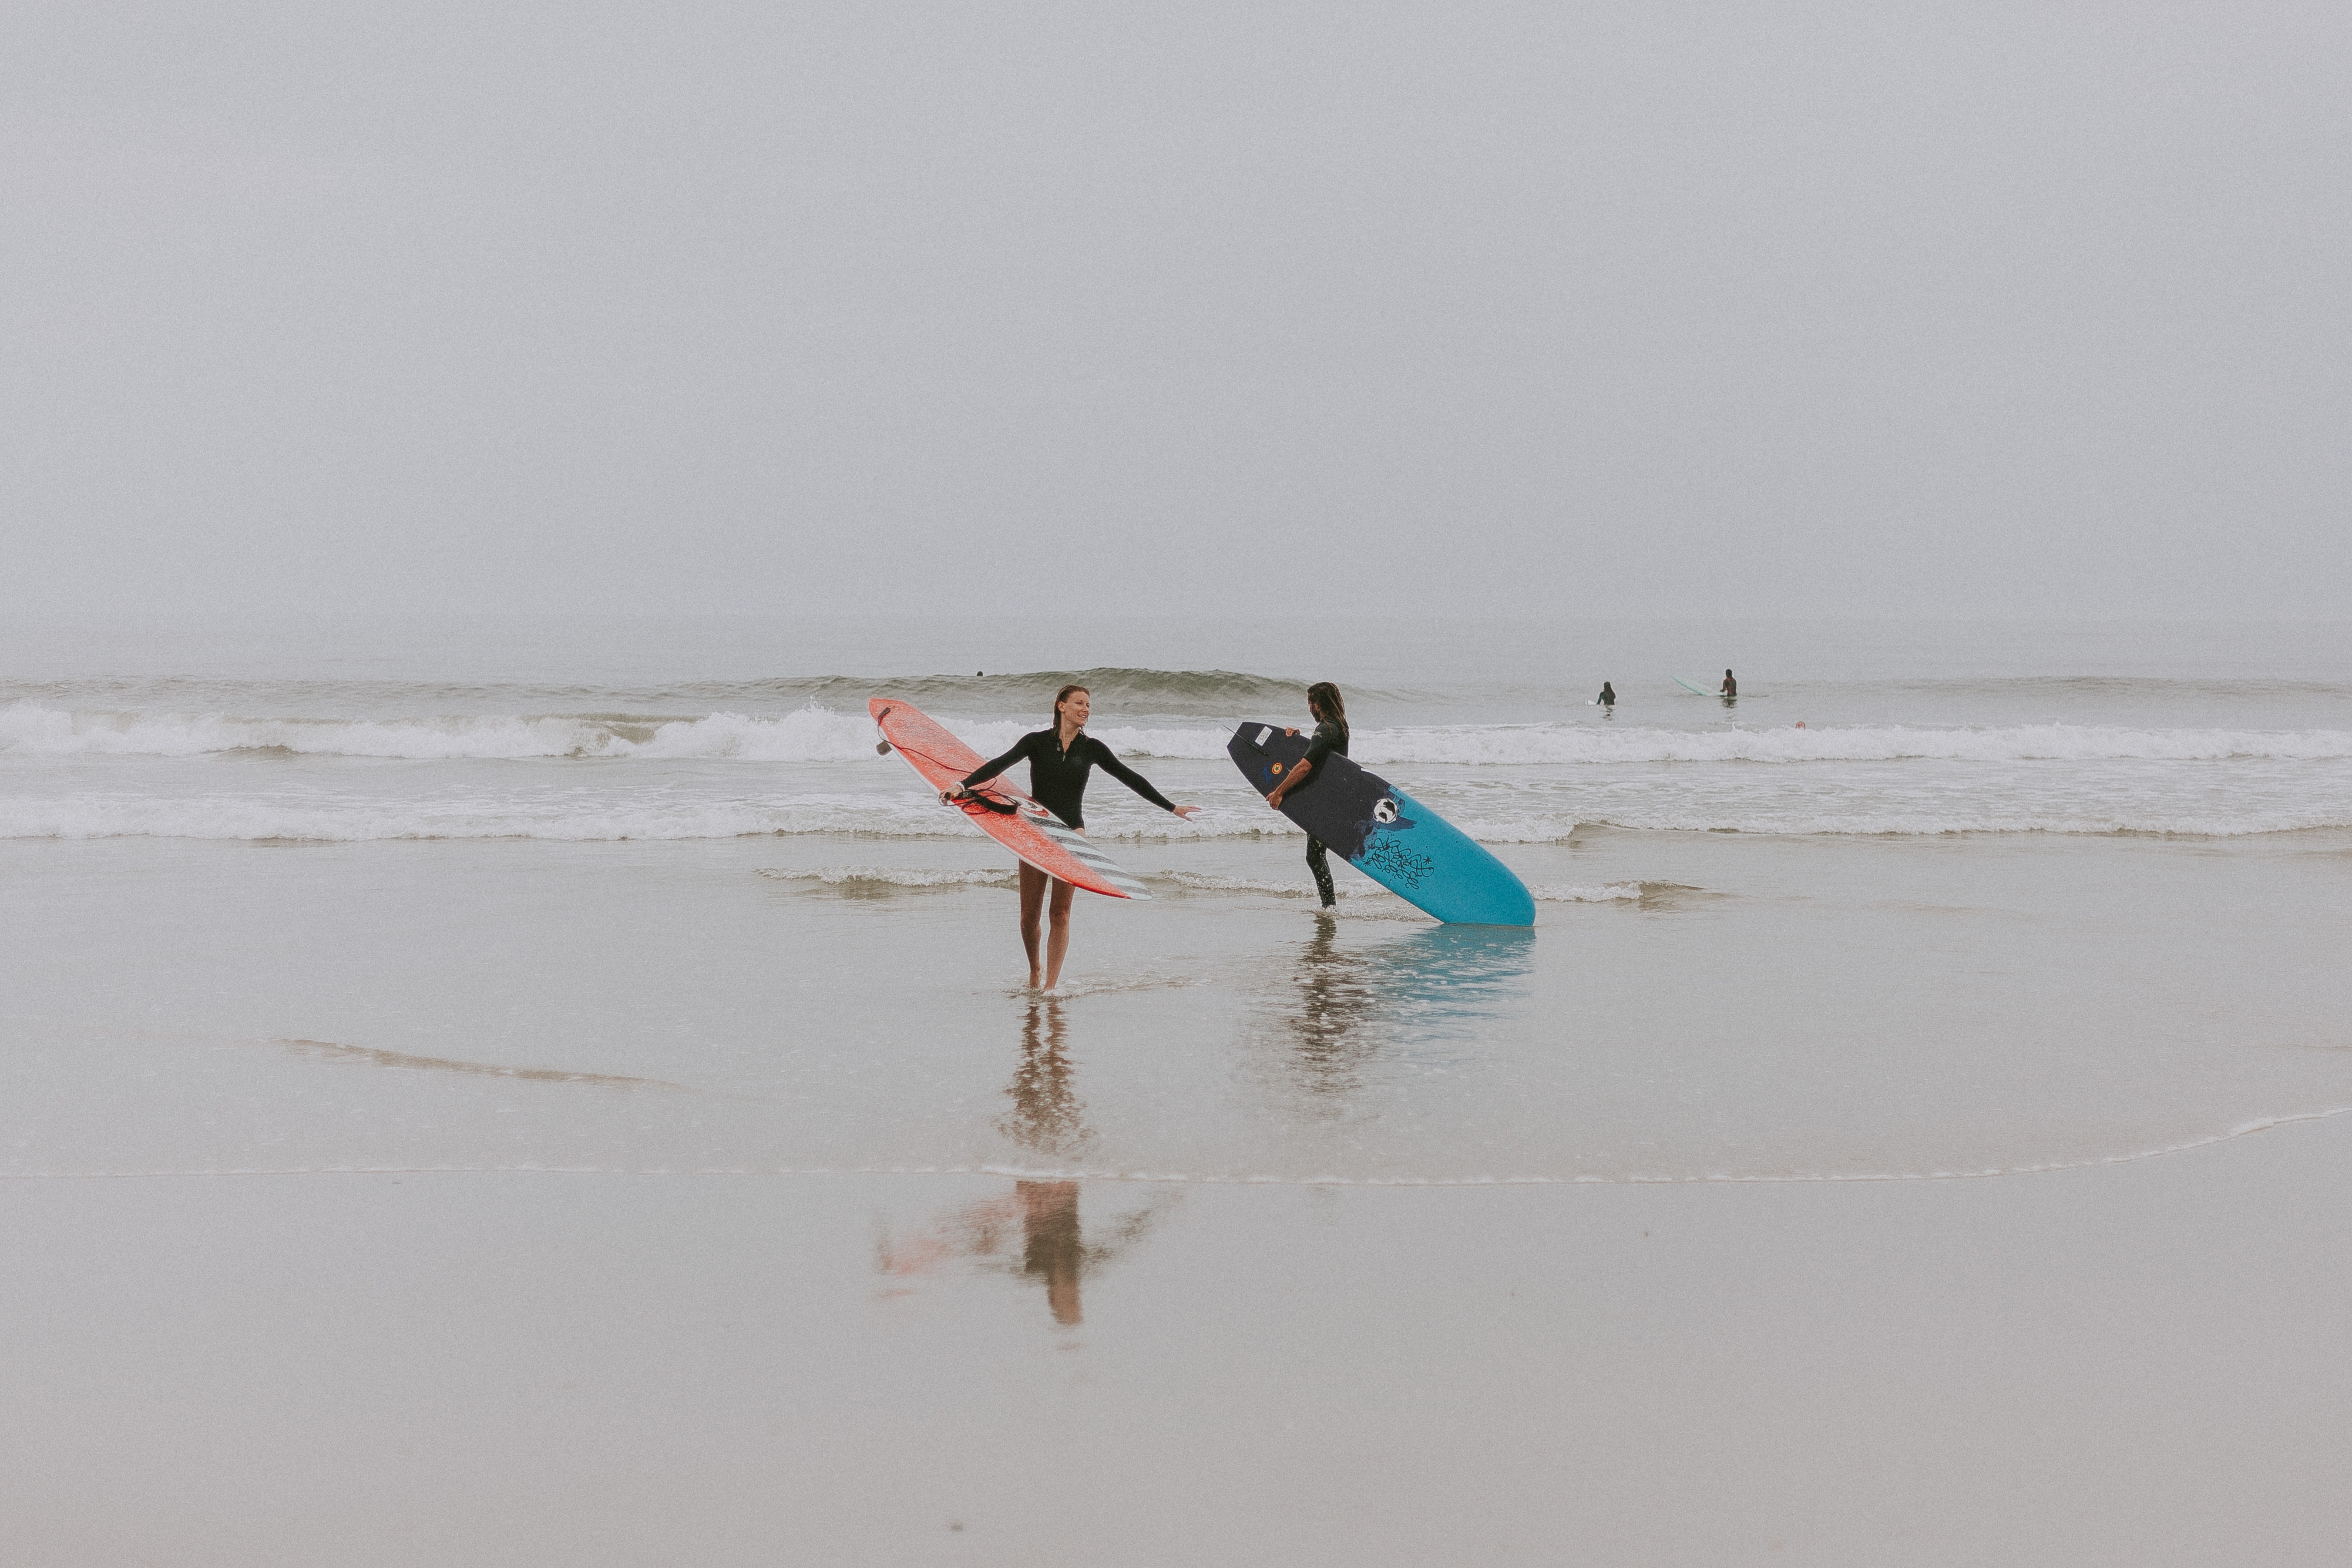 Photography of people on seashore holding surfboards during the fog